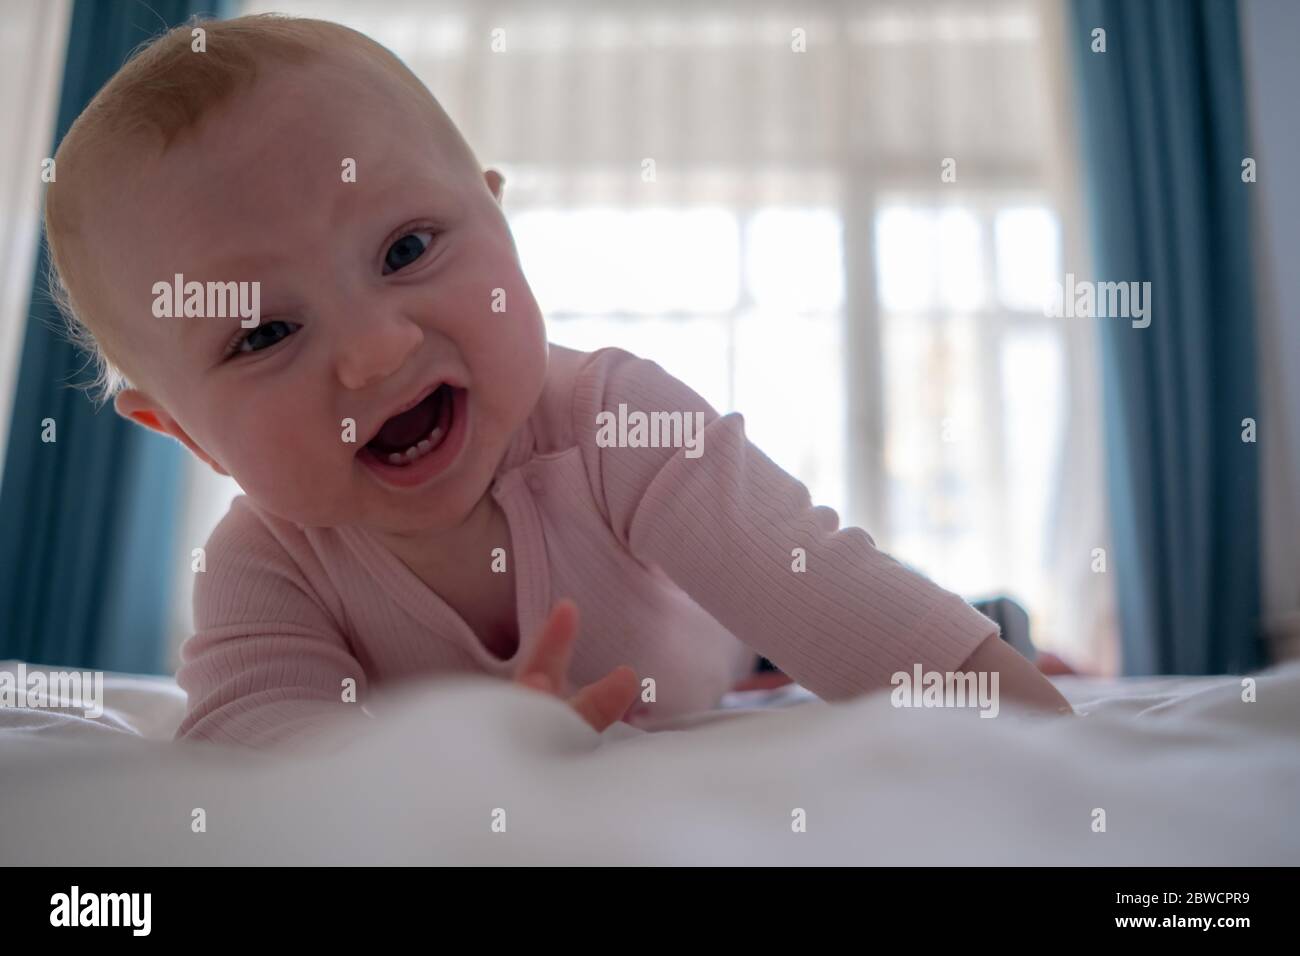 Cute Baby Girl Standing On Bed Make Funny Faces Angry Face Crying In The Morning Stock Photo Alamy